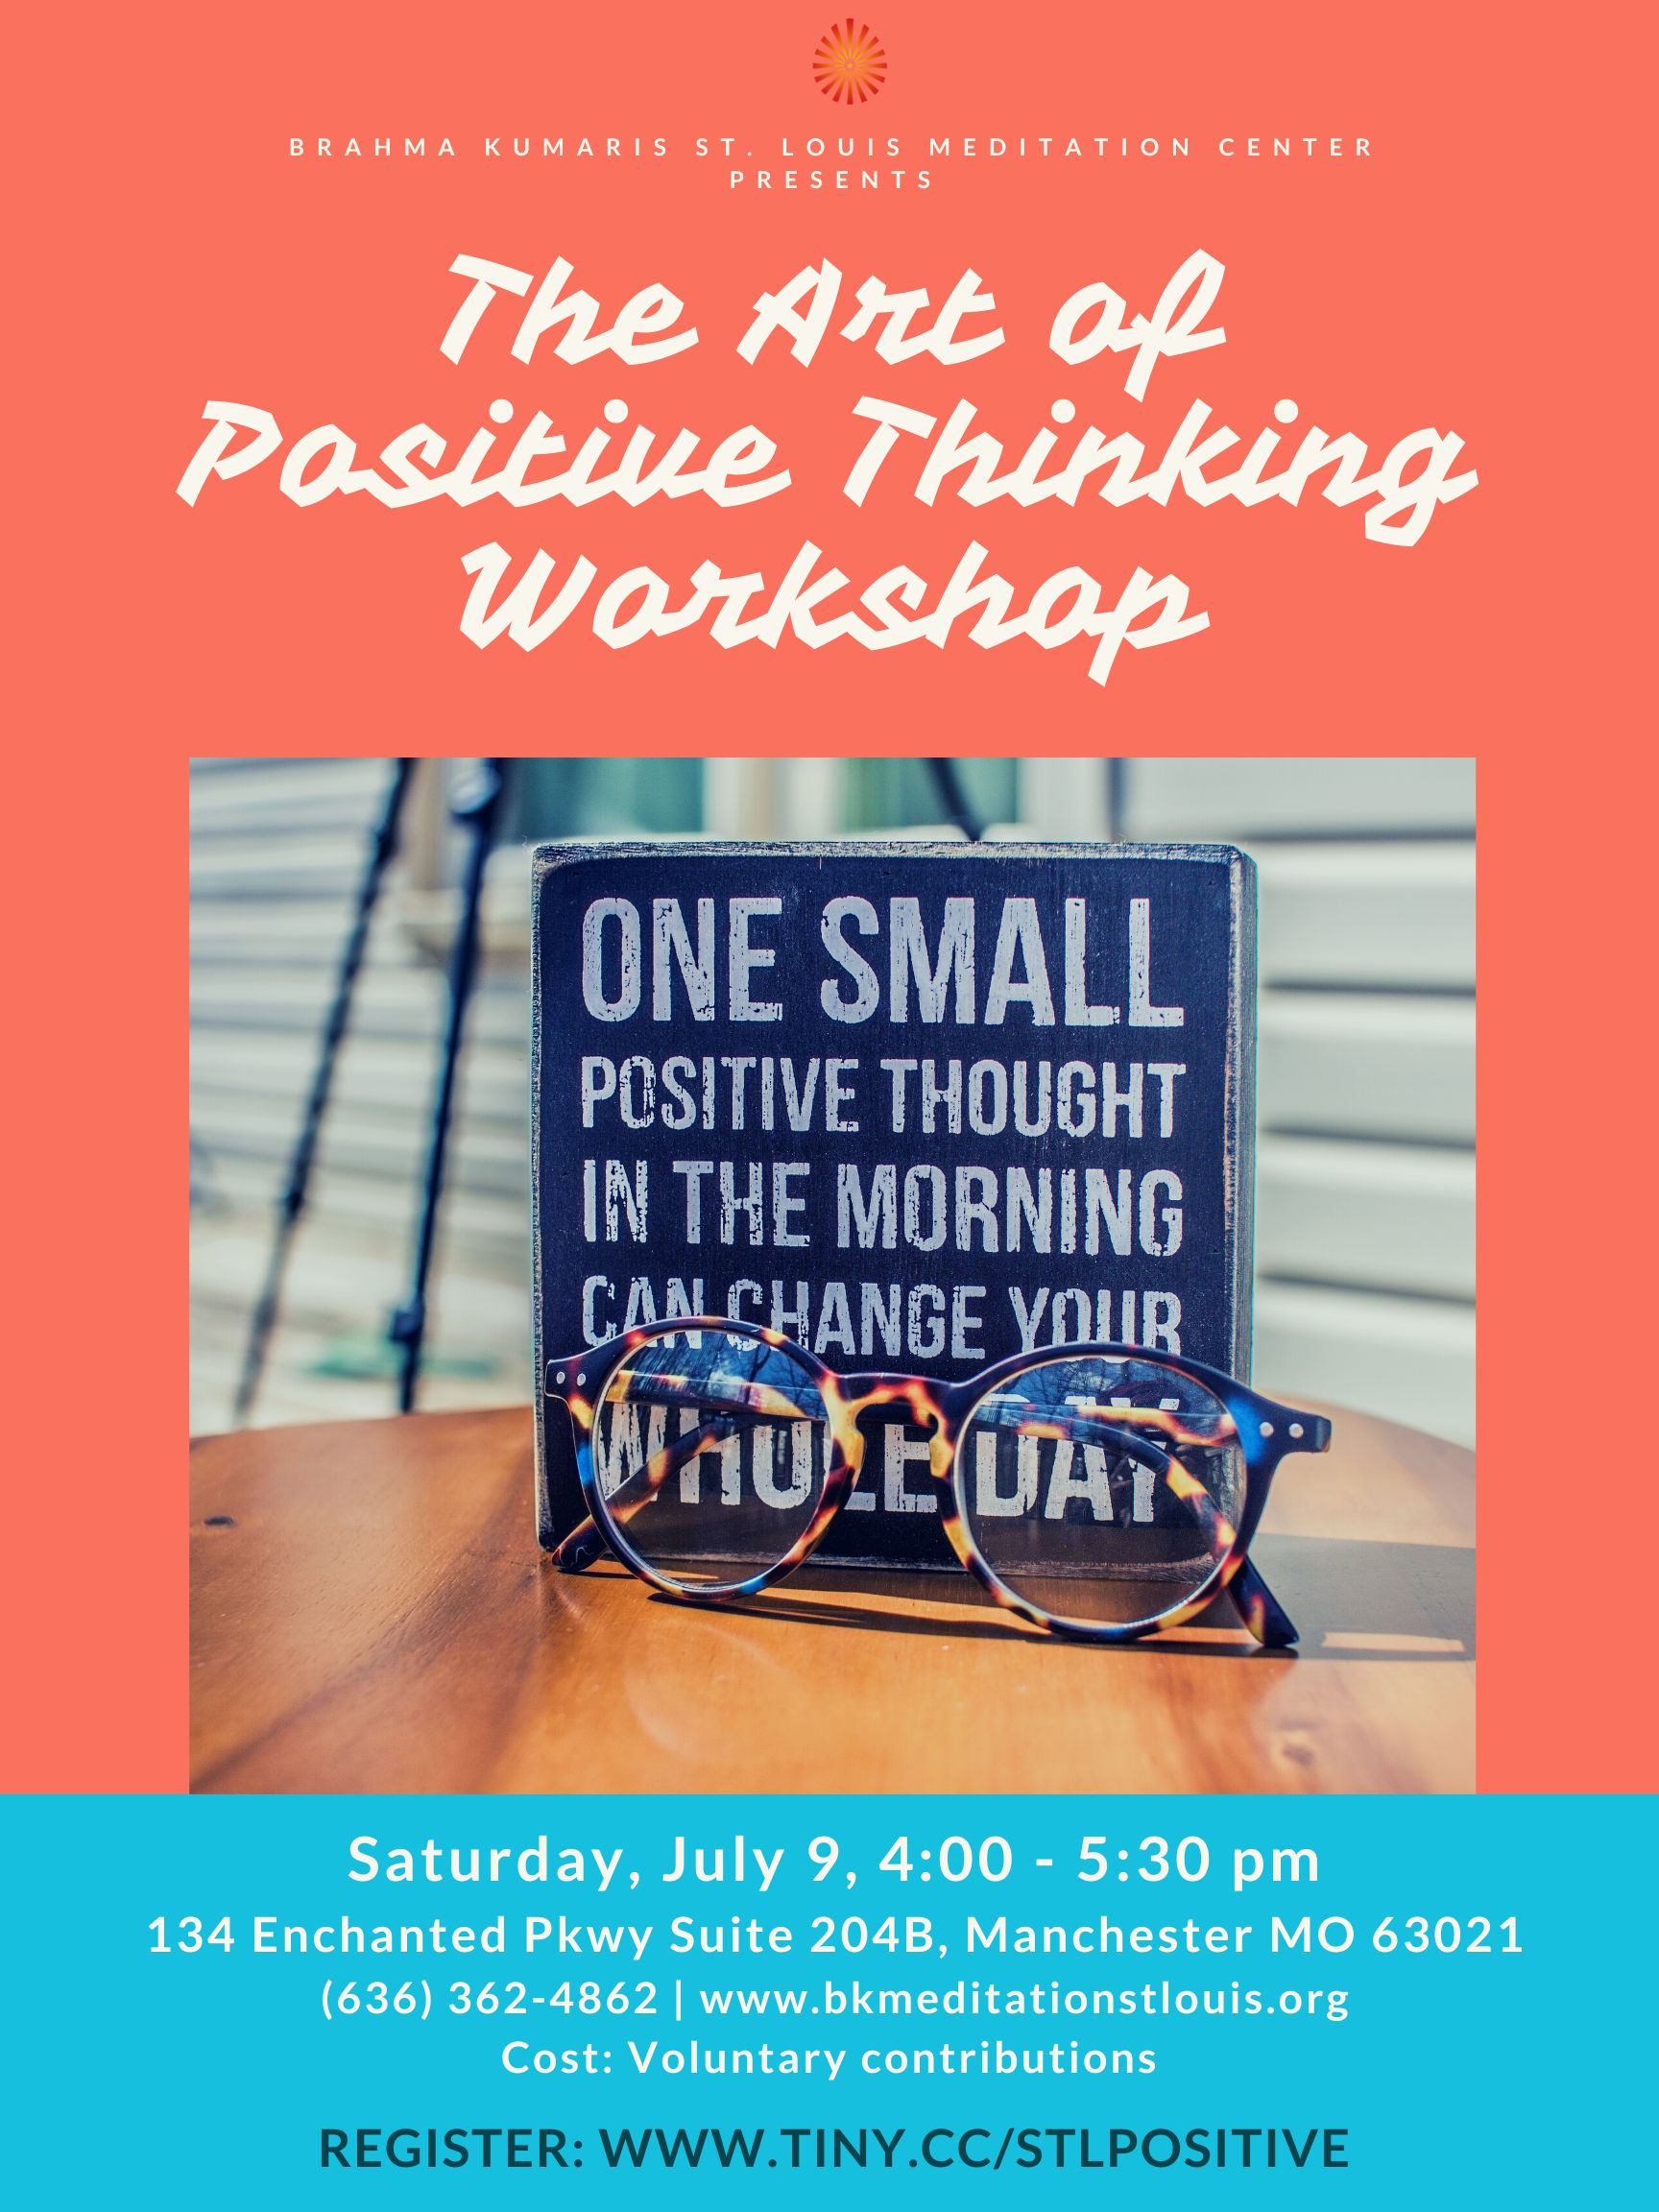 THE ART OF POSITIVE THINKING WORKSHOP